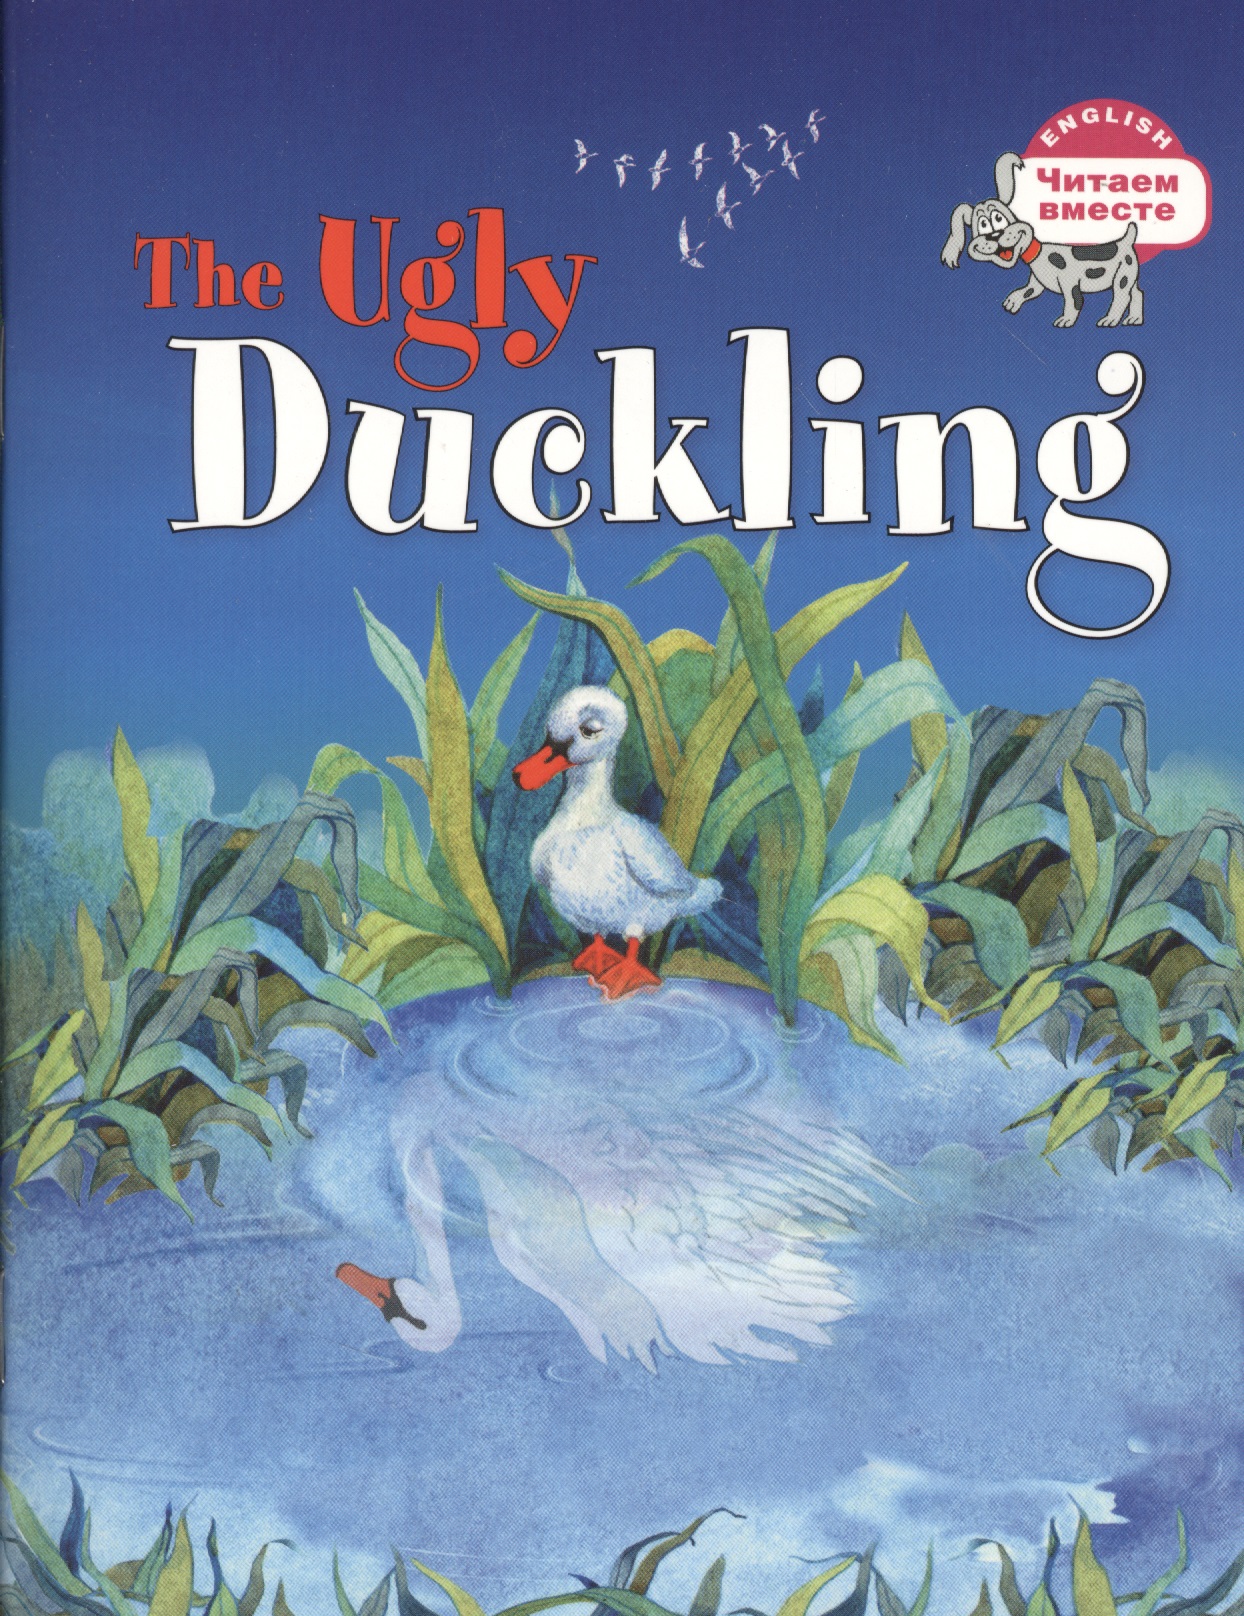 the ugly duckling Гадкий утёнок=The Ugly Duckling